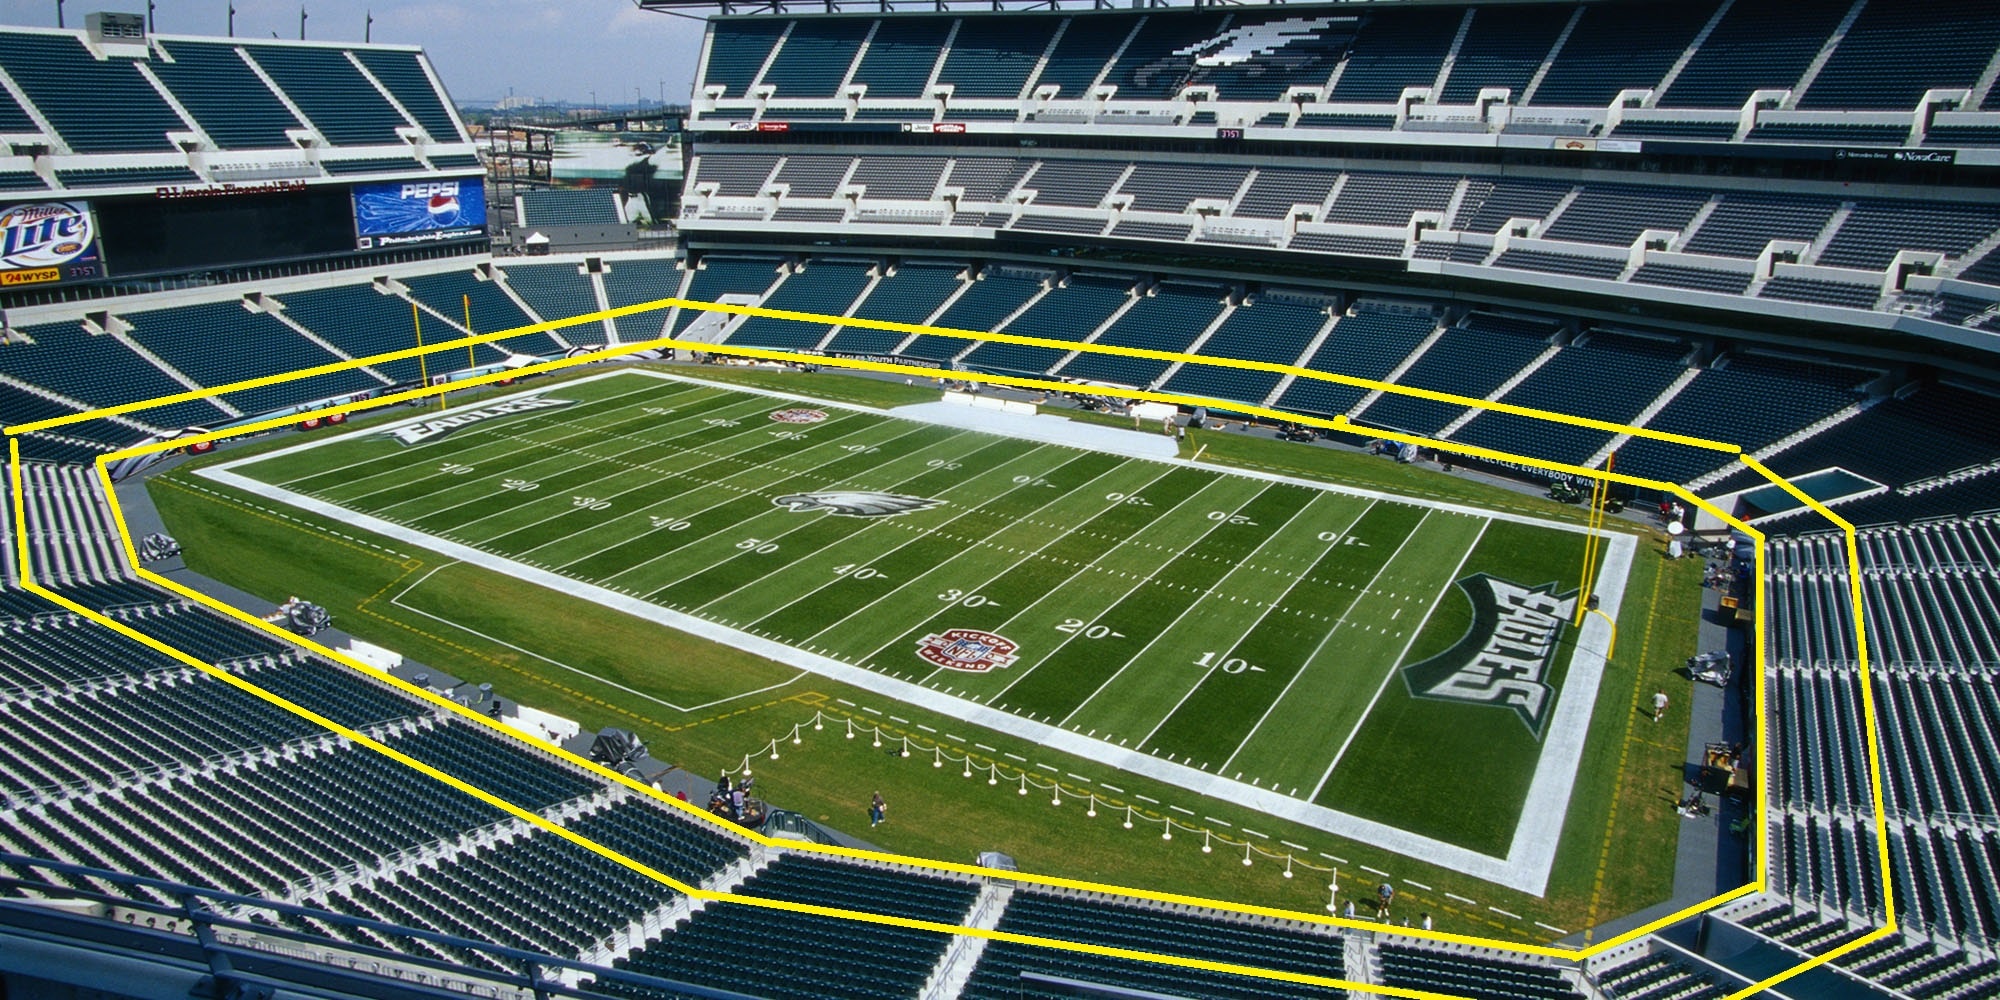 NFL May Cover Lower Rows With Tarps This Season